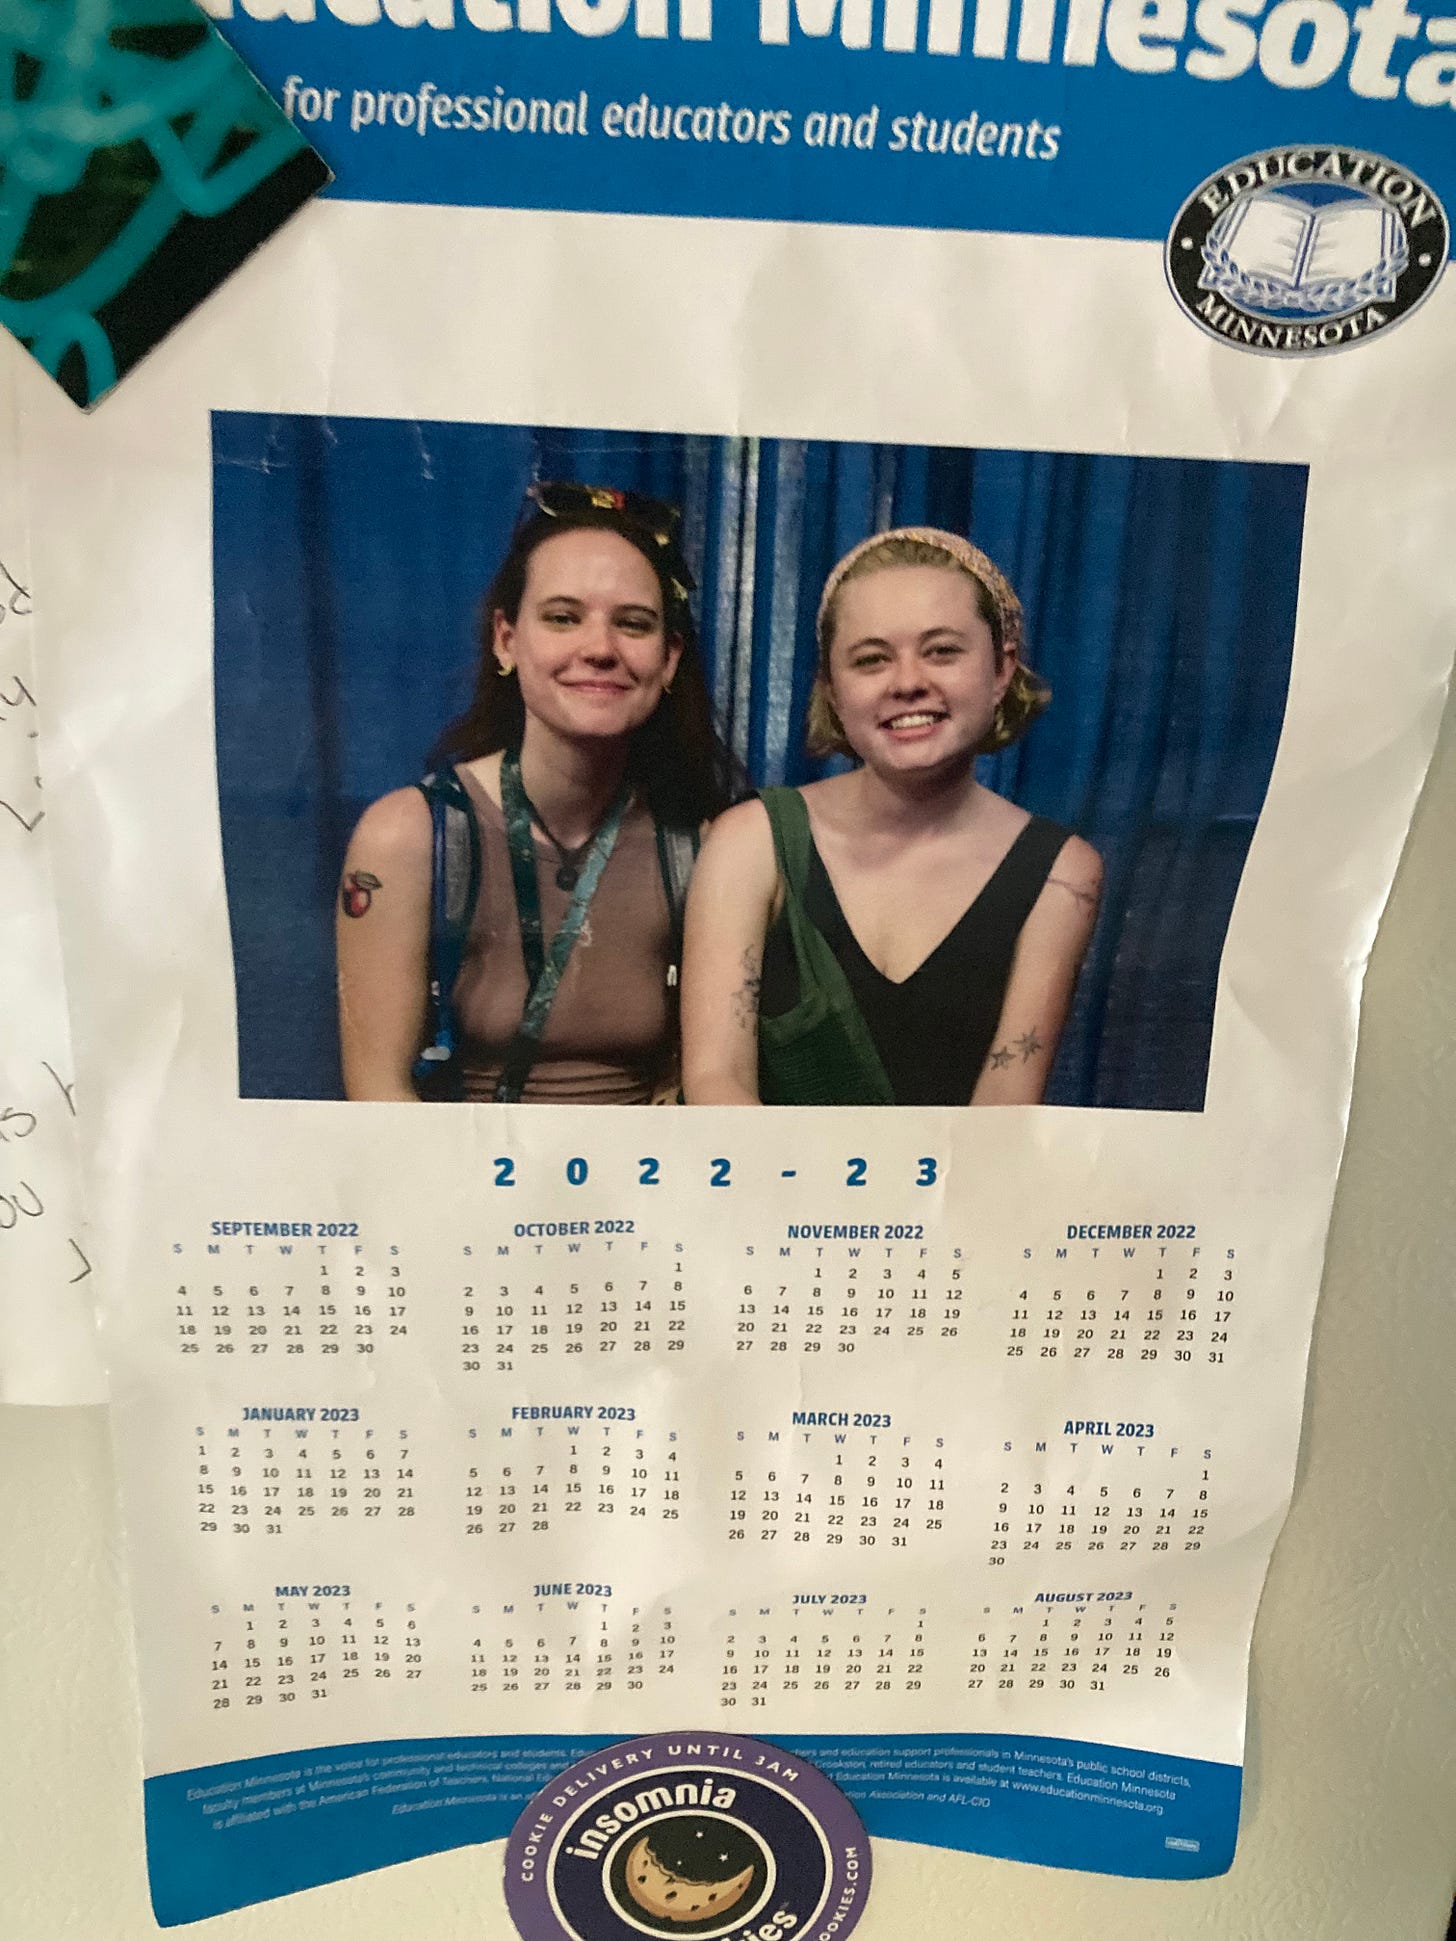 a photo of a yearly calendar with an image of two girls in tanktops smiling, the calendar has an Education Minnesota logo and reads "for professional educators and students"